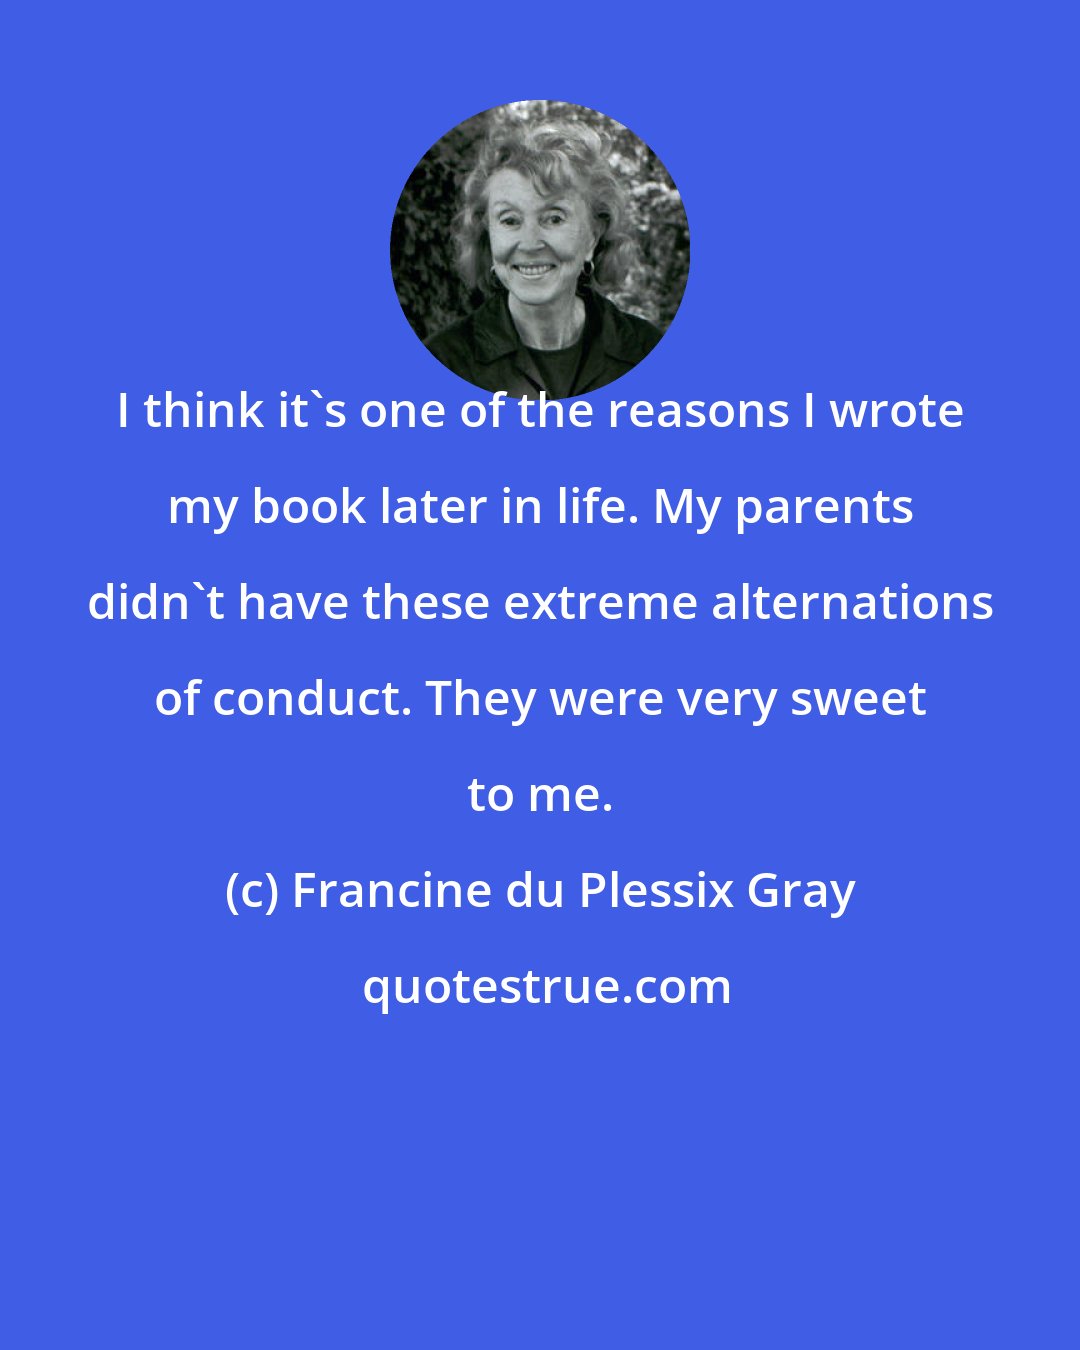 Francine du Plessix Gray: I think it's one of the reasons I wrote my book later in life. My parents didn't have these extreme alternations of conduct. They were very sweet to me.